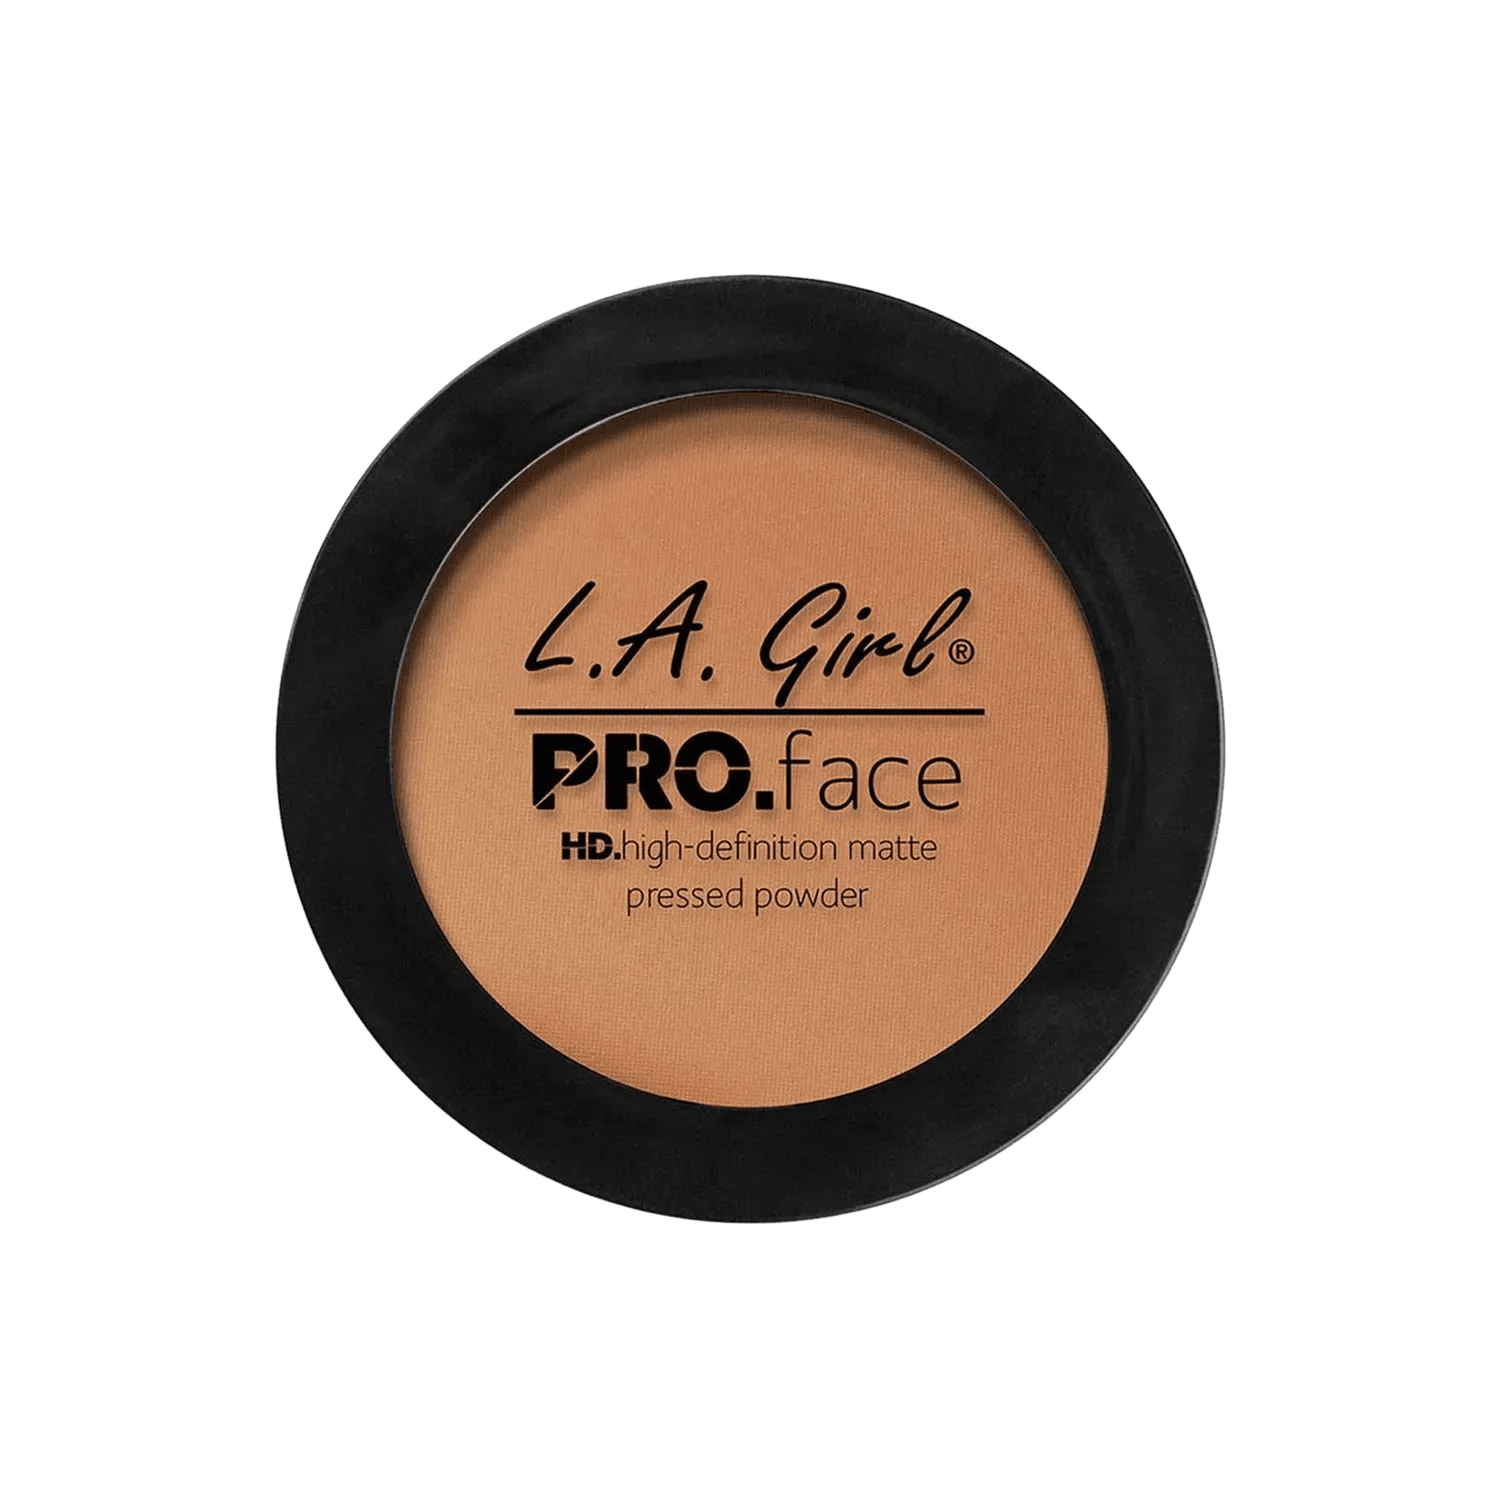 L.A. Girl | L.A. Girl HD PRO Face Pressed Powder Toffee (7g)